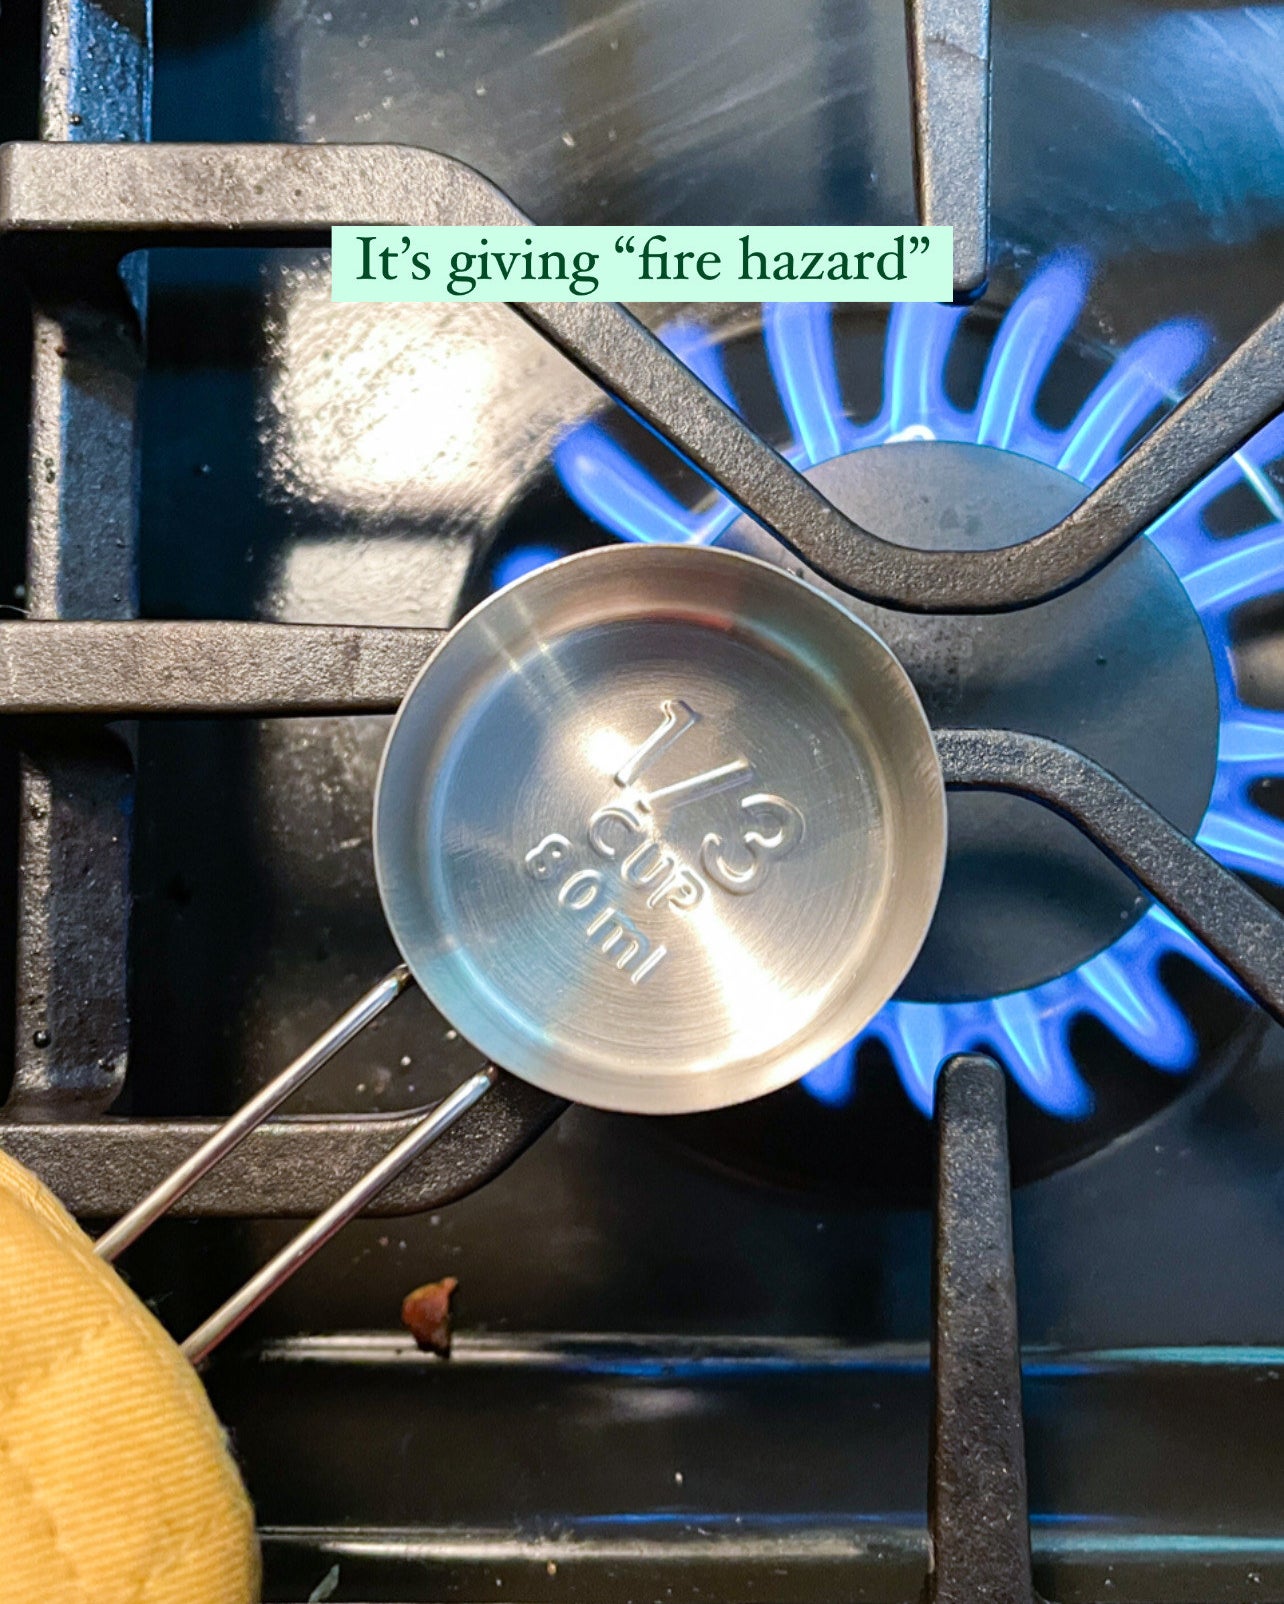 stainless steel measuring cup placed over the flame on a stove